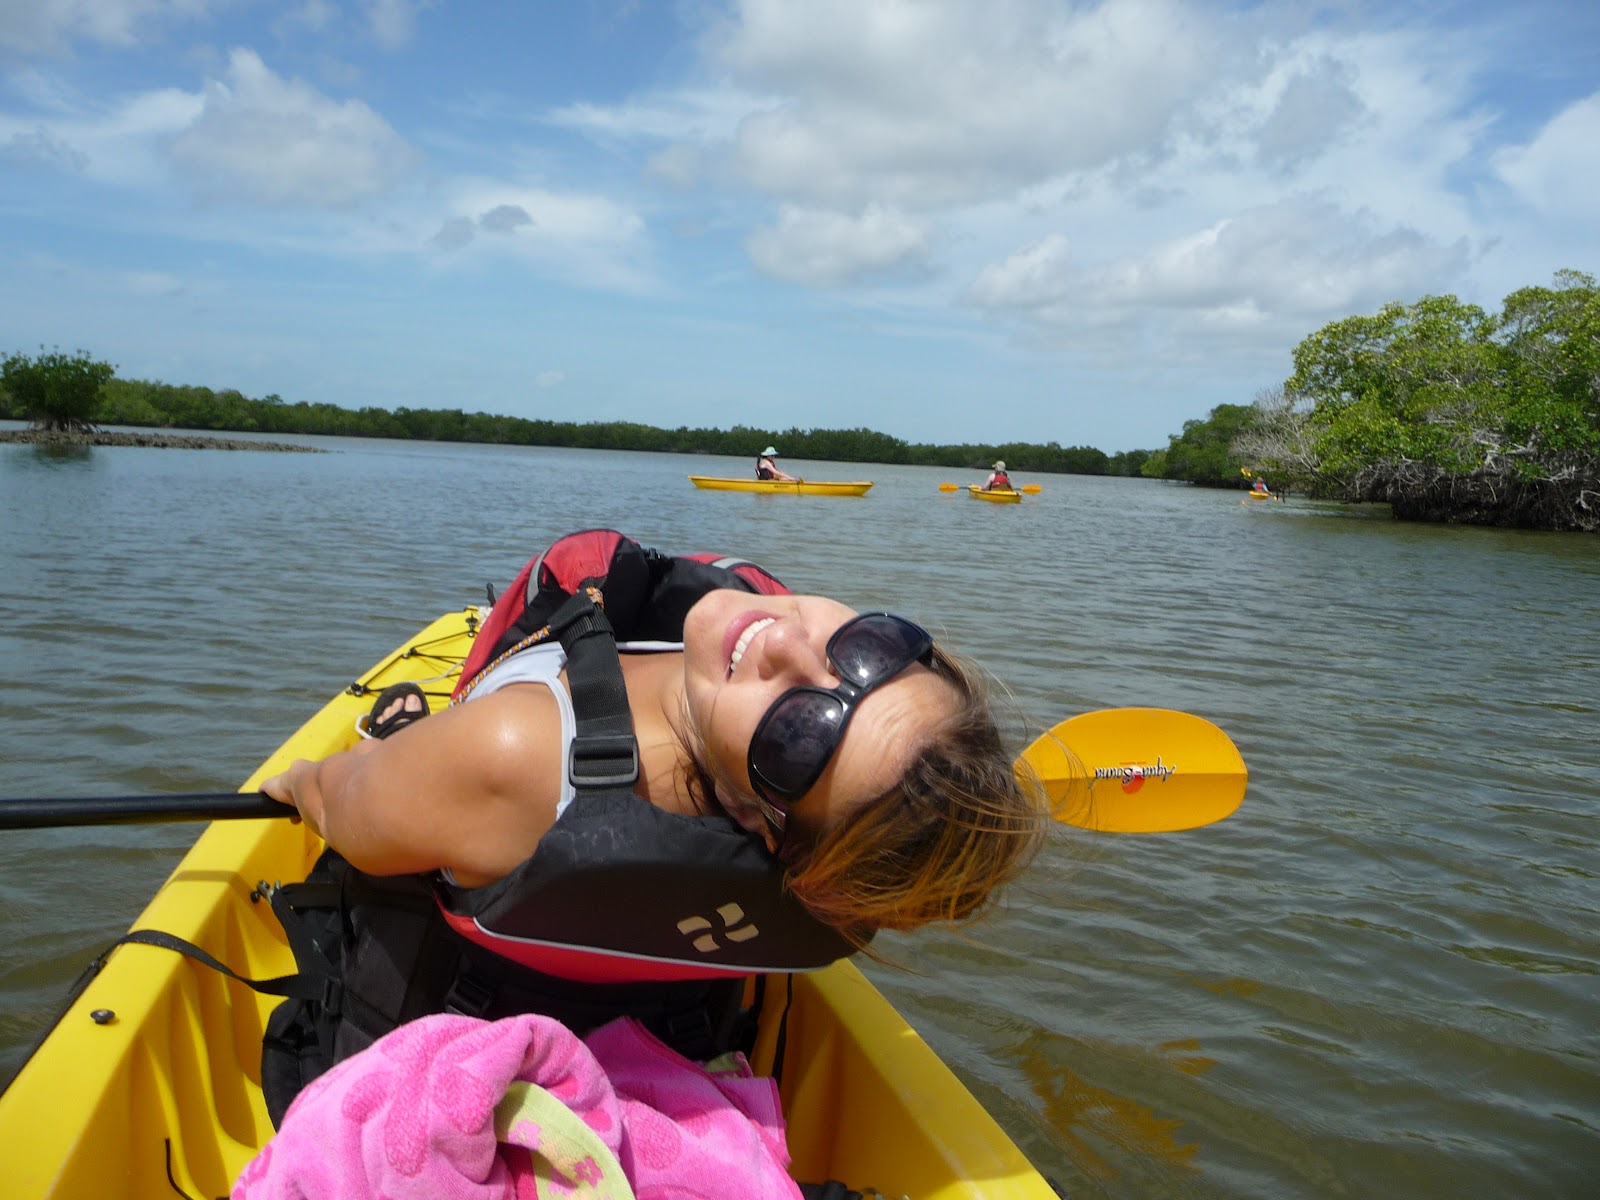 ... , Fla. At Its' Best: Tours and Sightseeing of The Florida Everglades